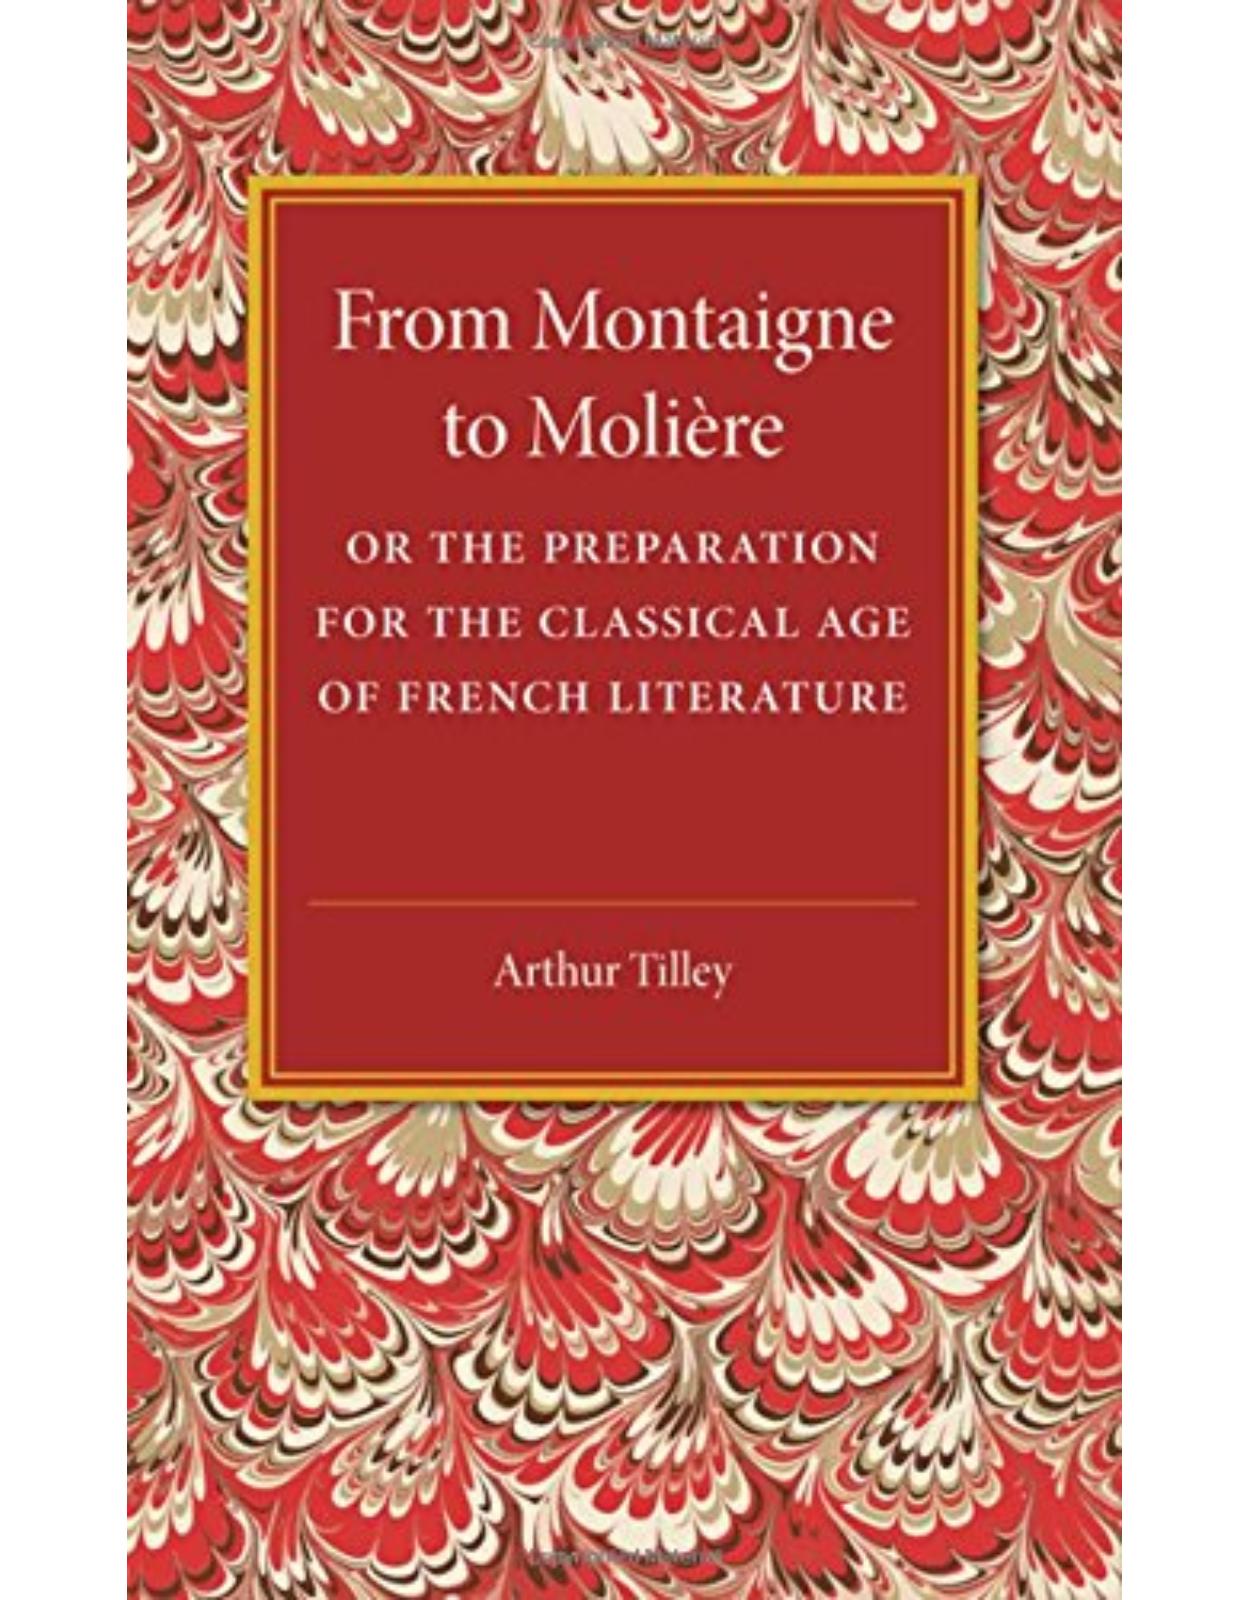 From Montaigne to Molière: Or the Preparation for the Classical Age of French Literature